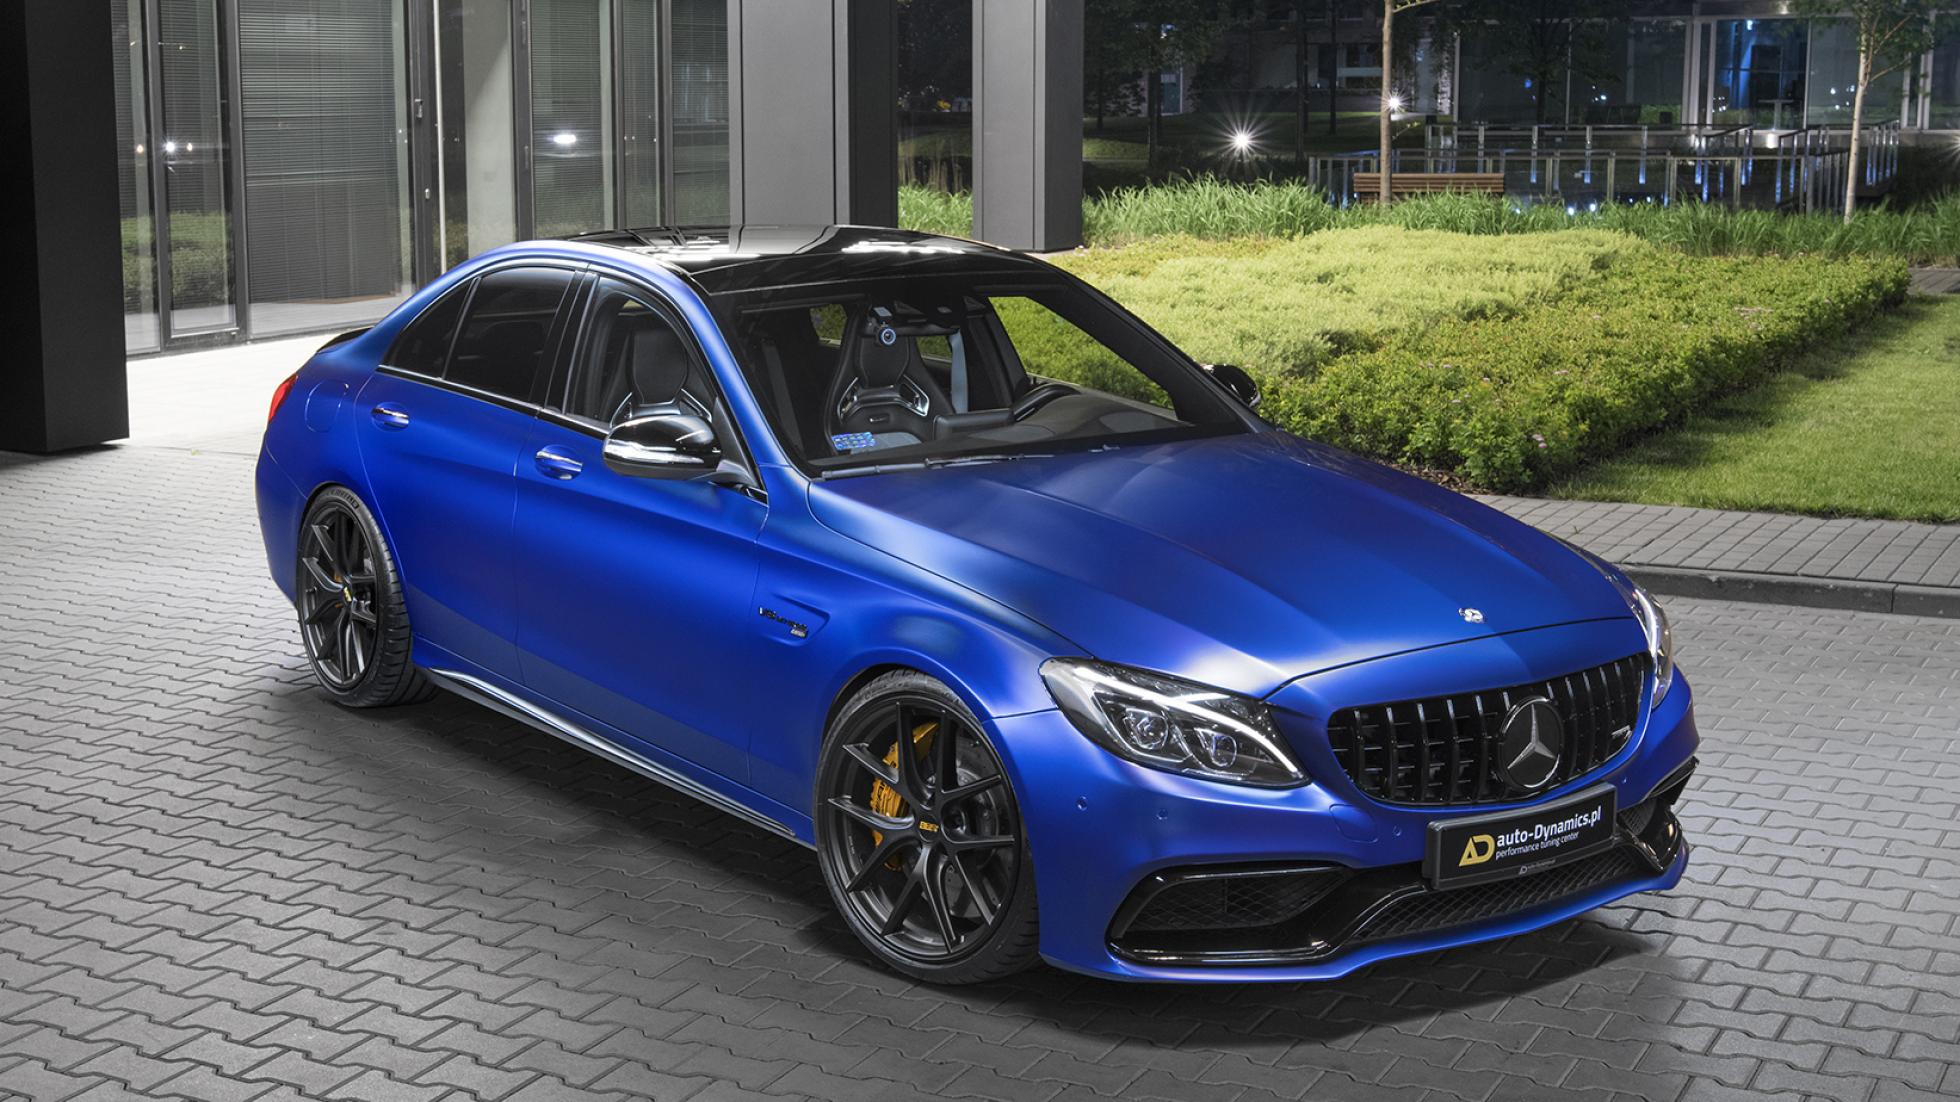 This is an 843bhp Mercedes-AMG C63 S